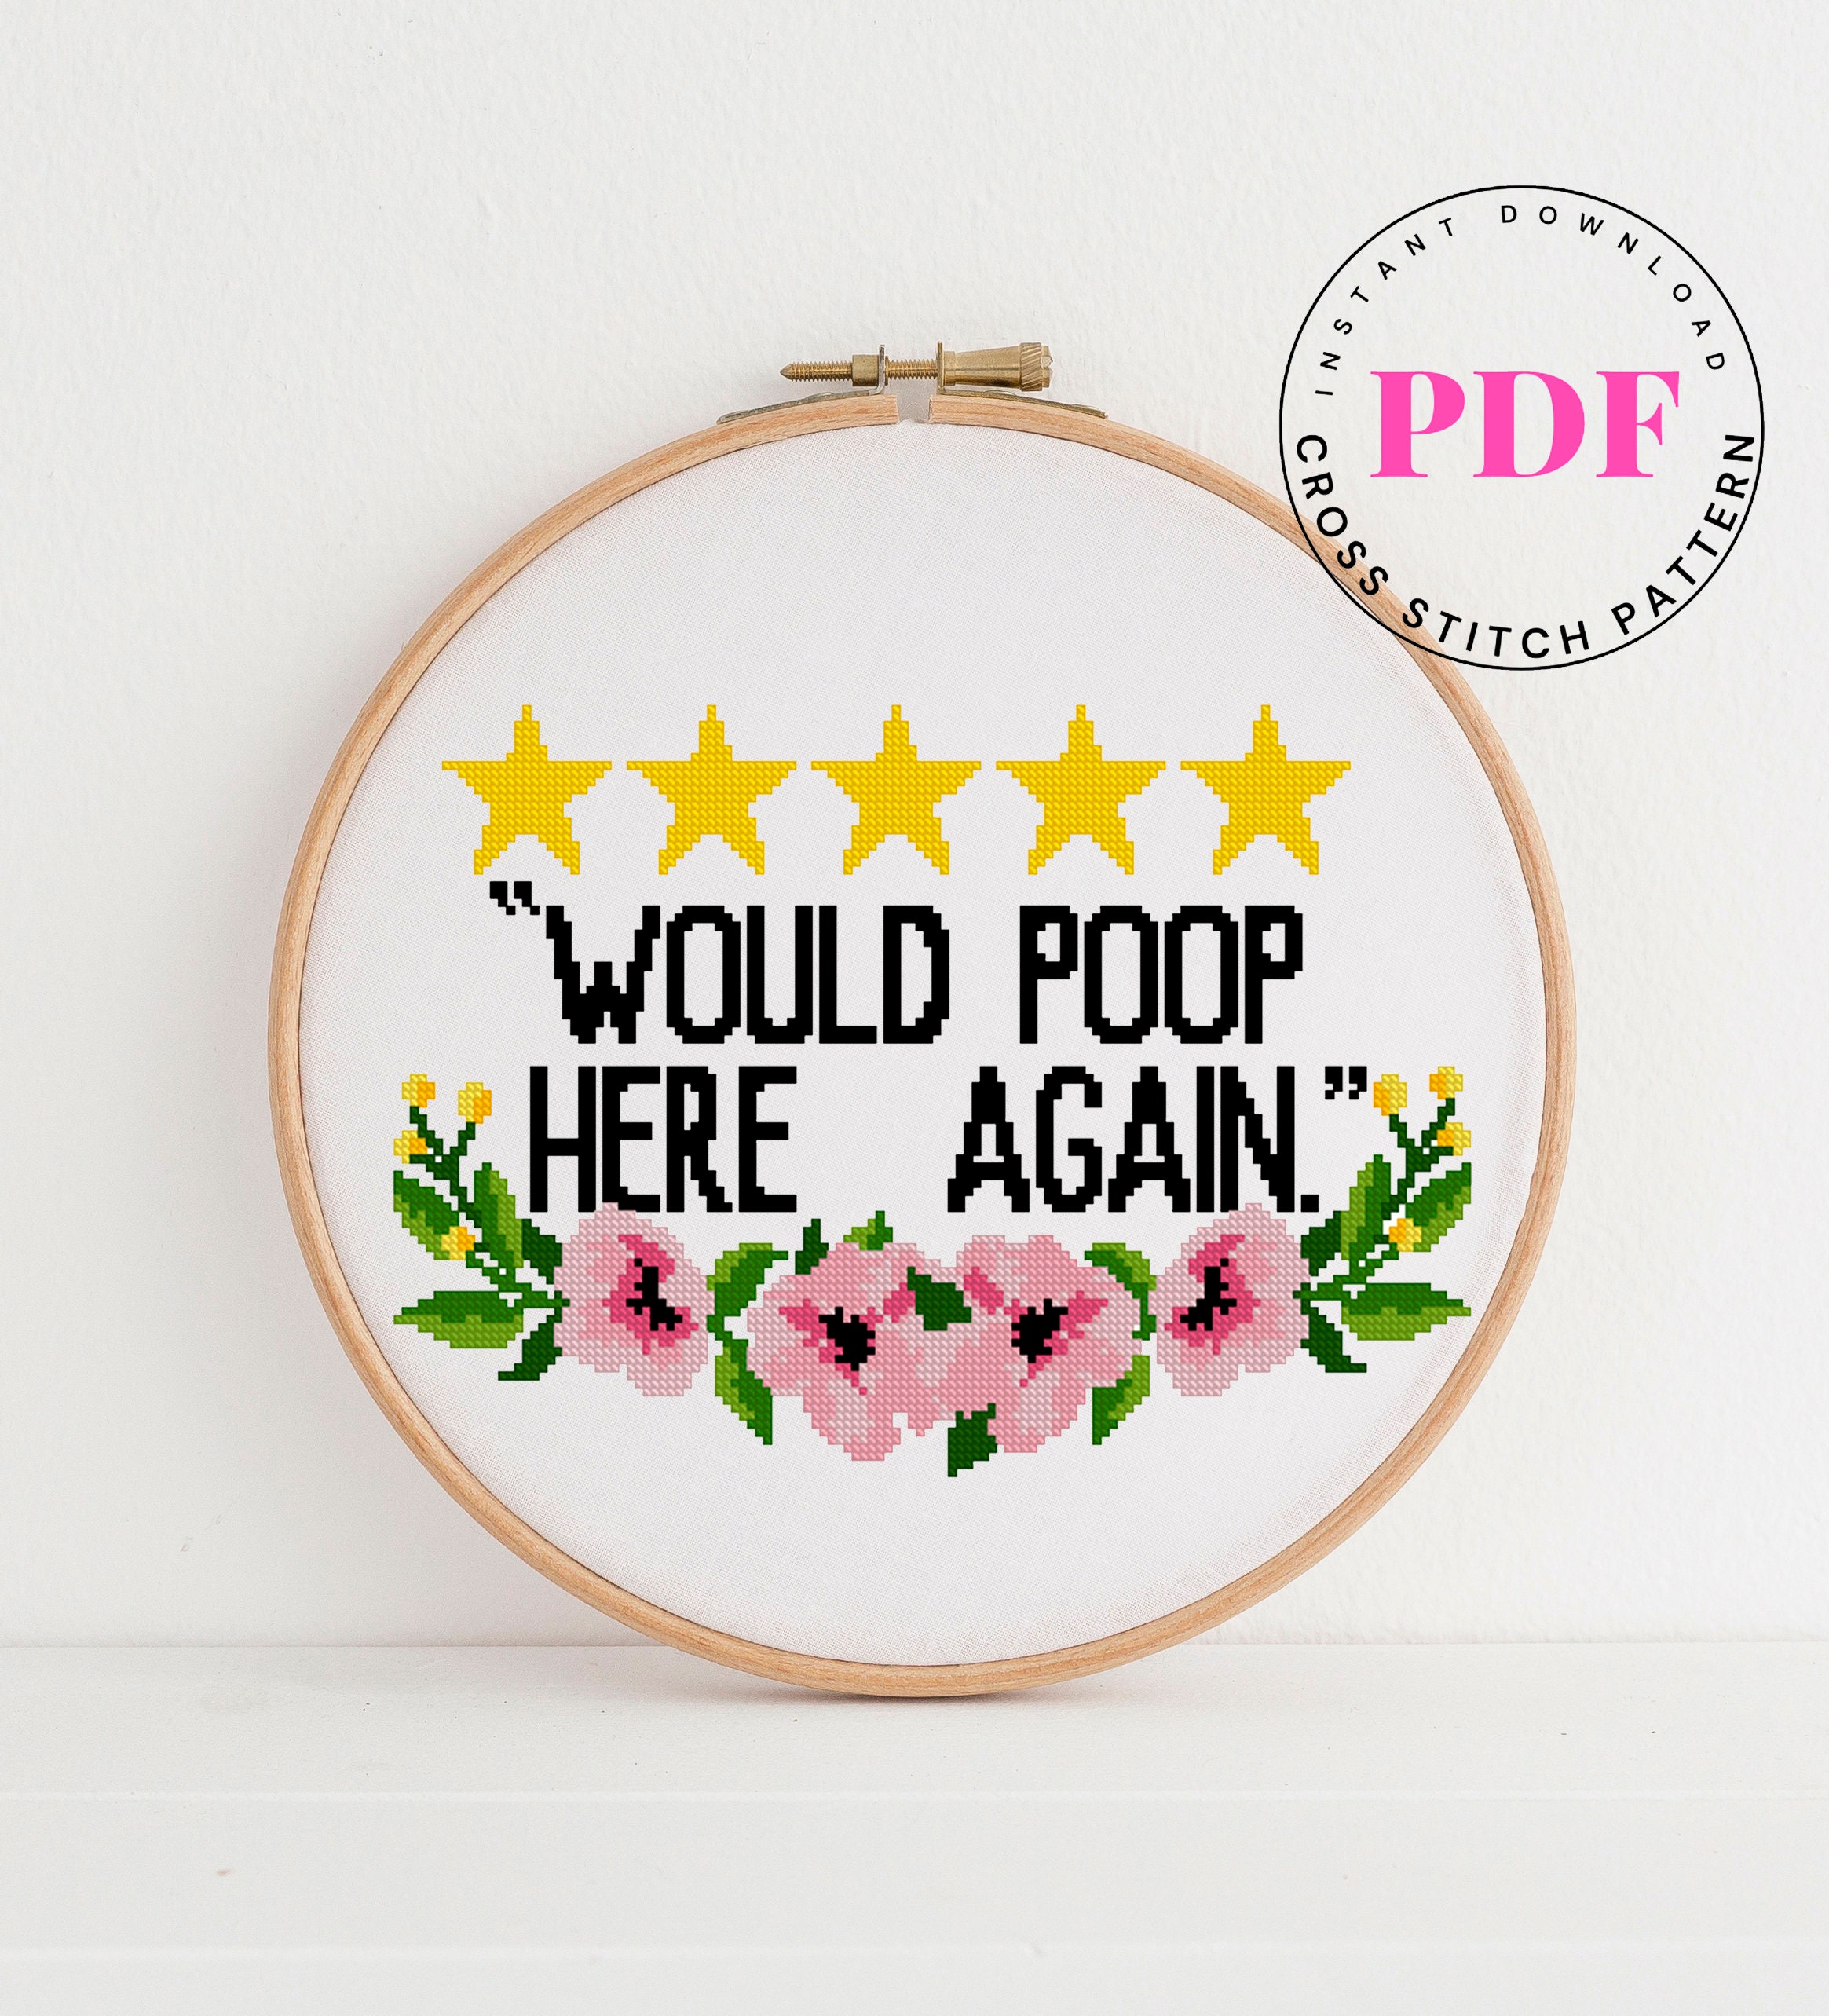 Funny Cross Stitch Pattern, Subversive Embroidery Design, Live Laugh Poop,  Home Decor, Instant Download PDF Chart 